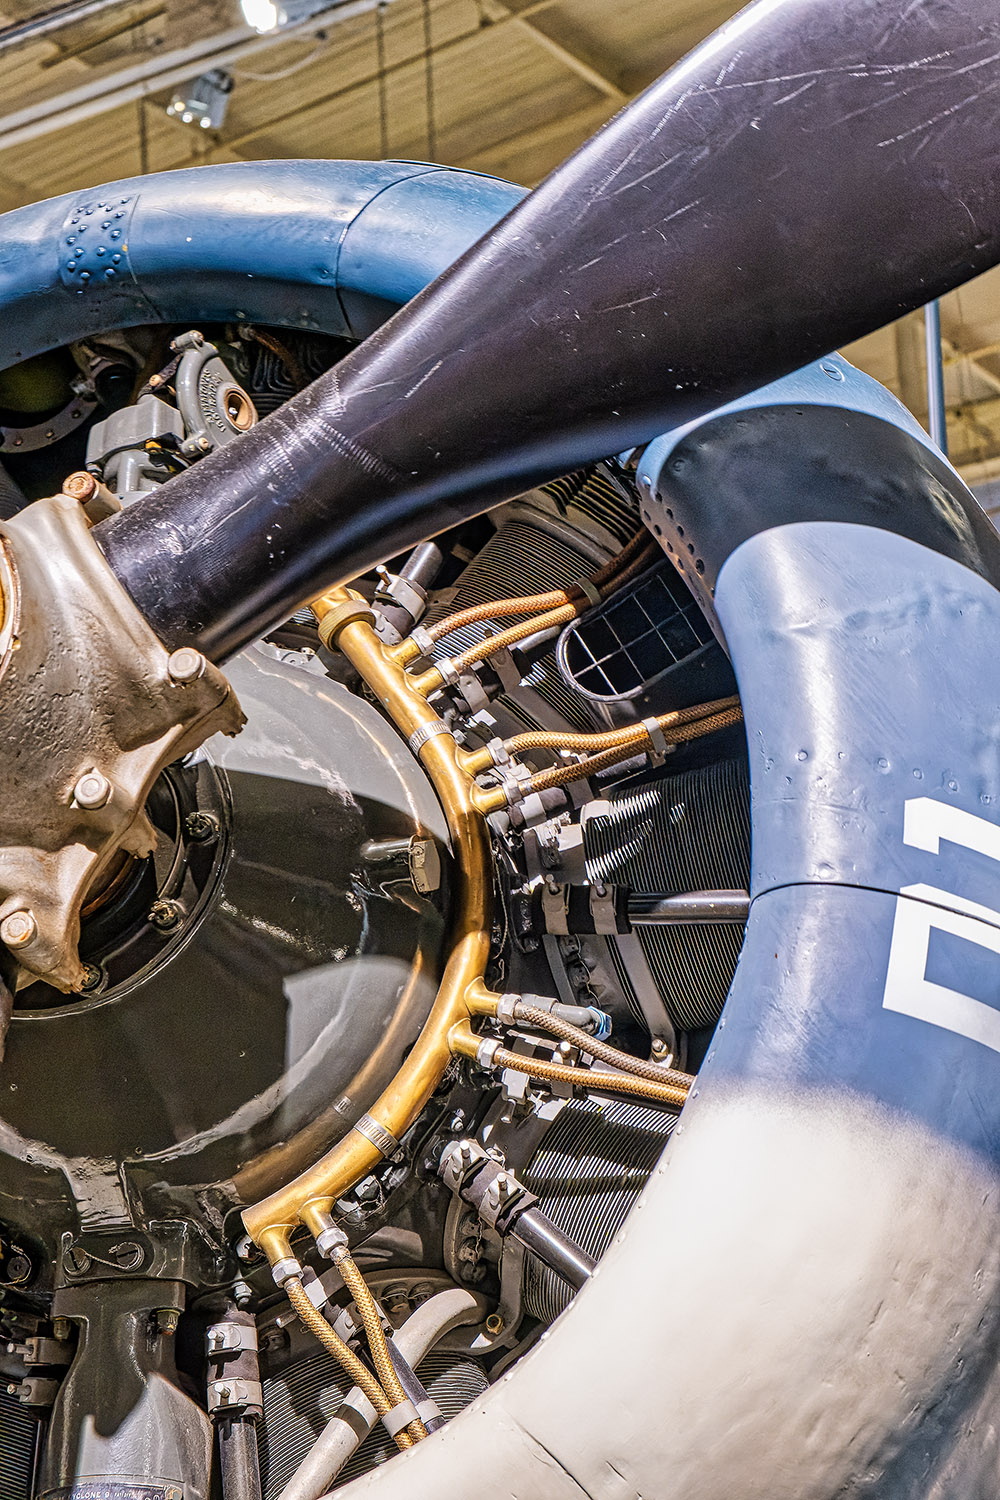 A look at the engine of the Douglas SBD Dauntless